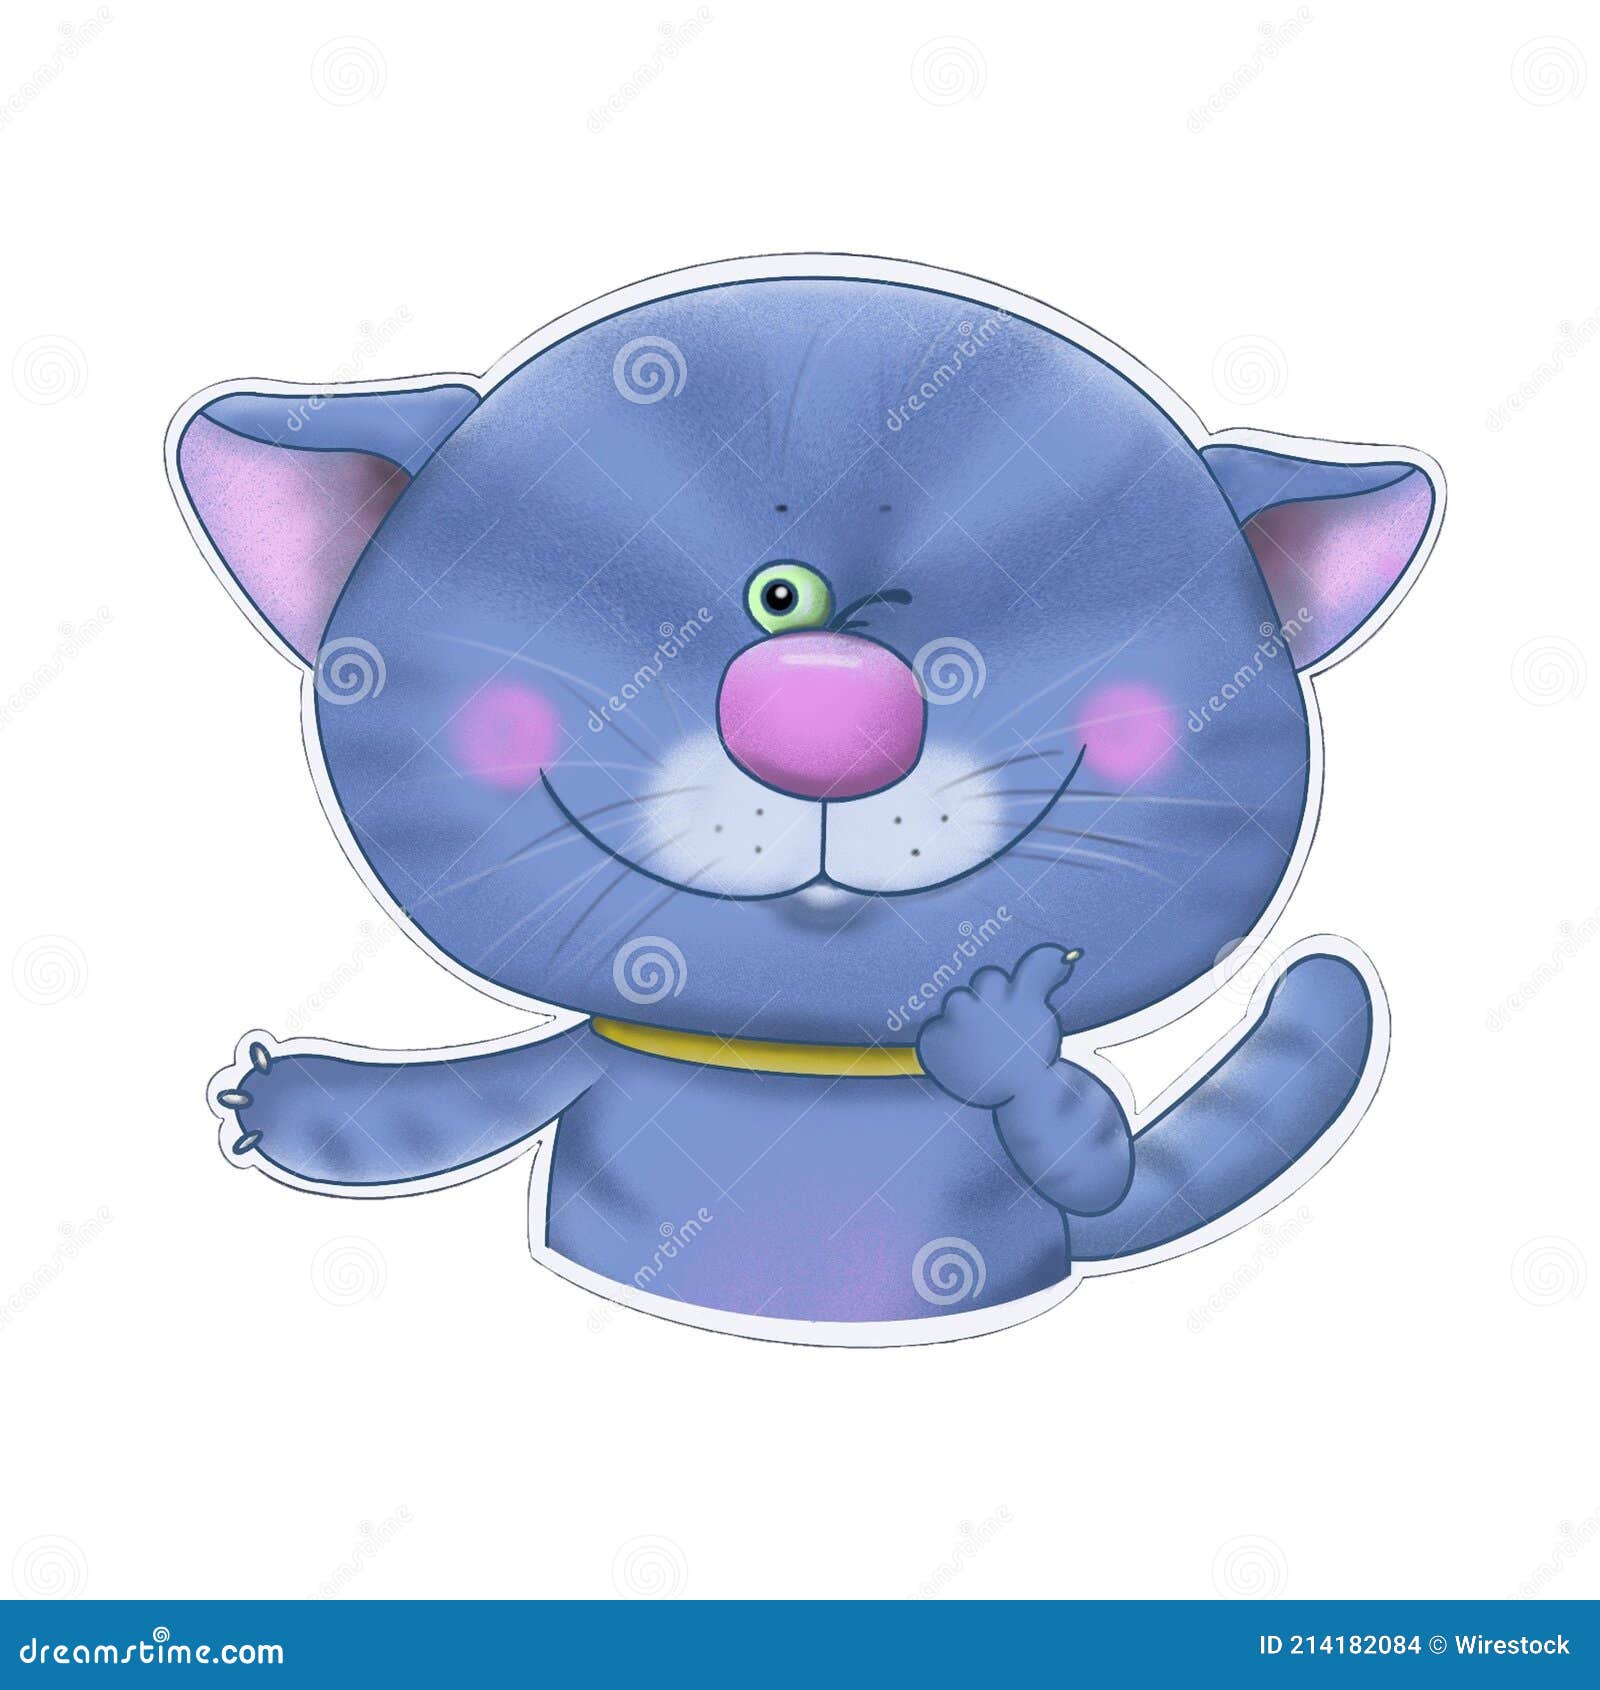 Who is Doraemon the Beloved Blue Cat From Japan | Culture Trip